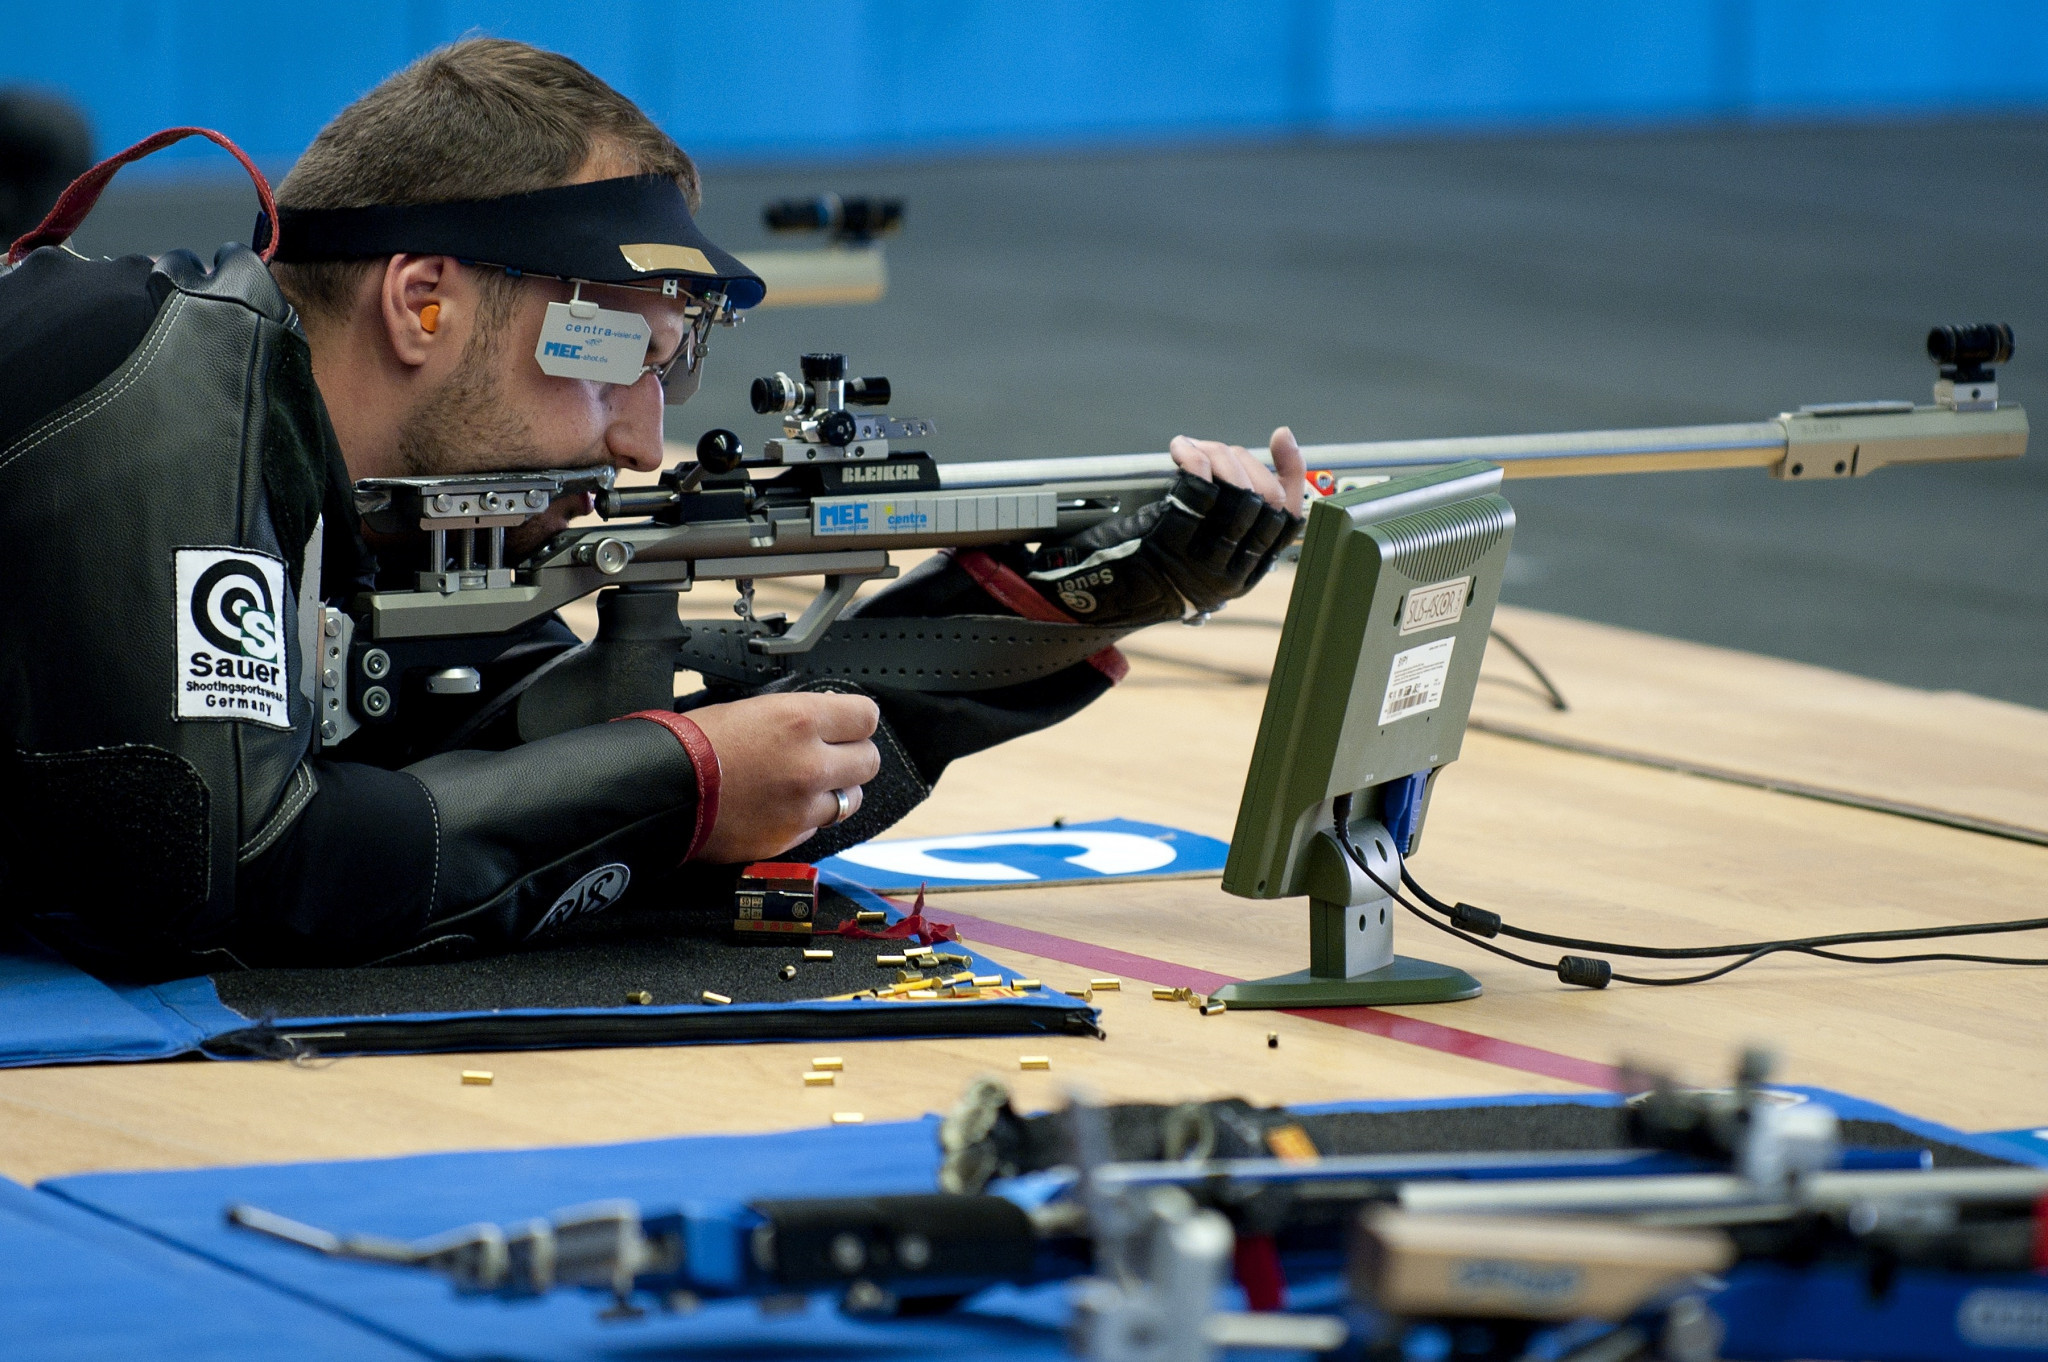 The last edition of the ISSF World Championship was held in Spanish city Granada in 2014 ©Getty Images